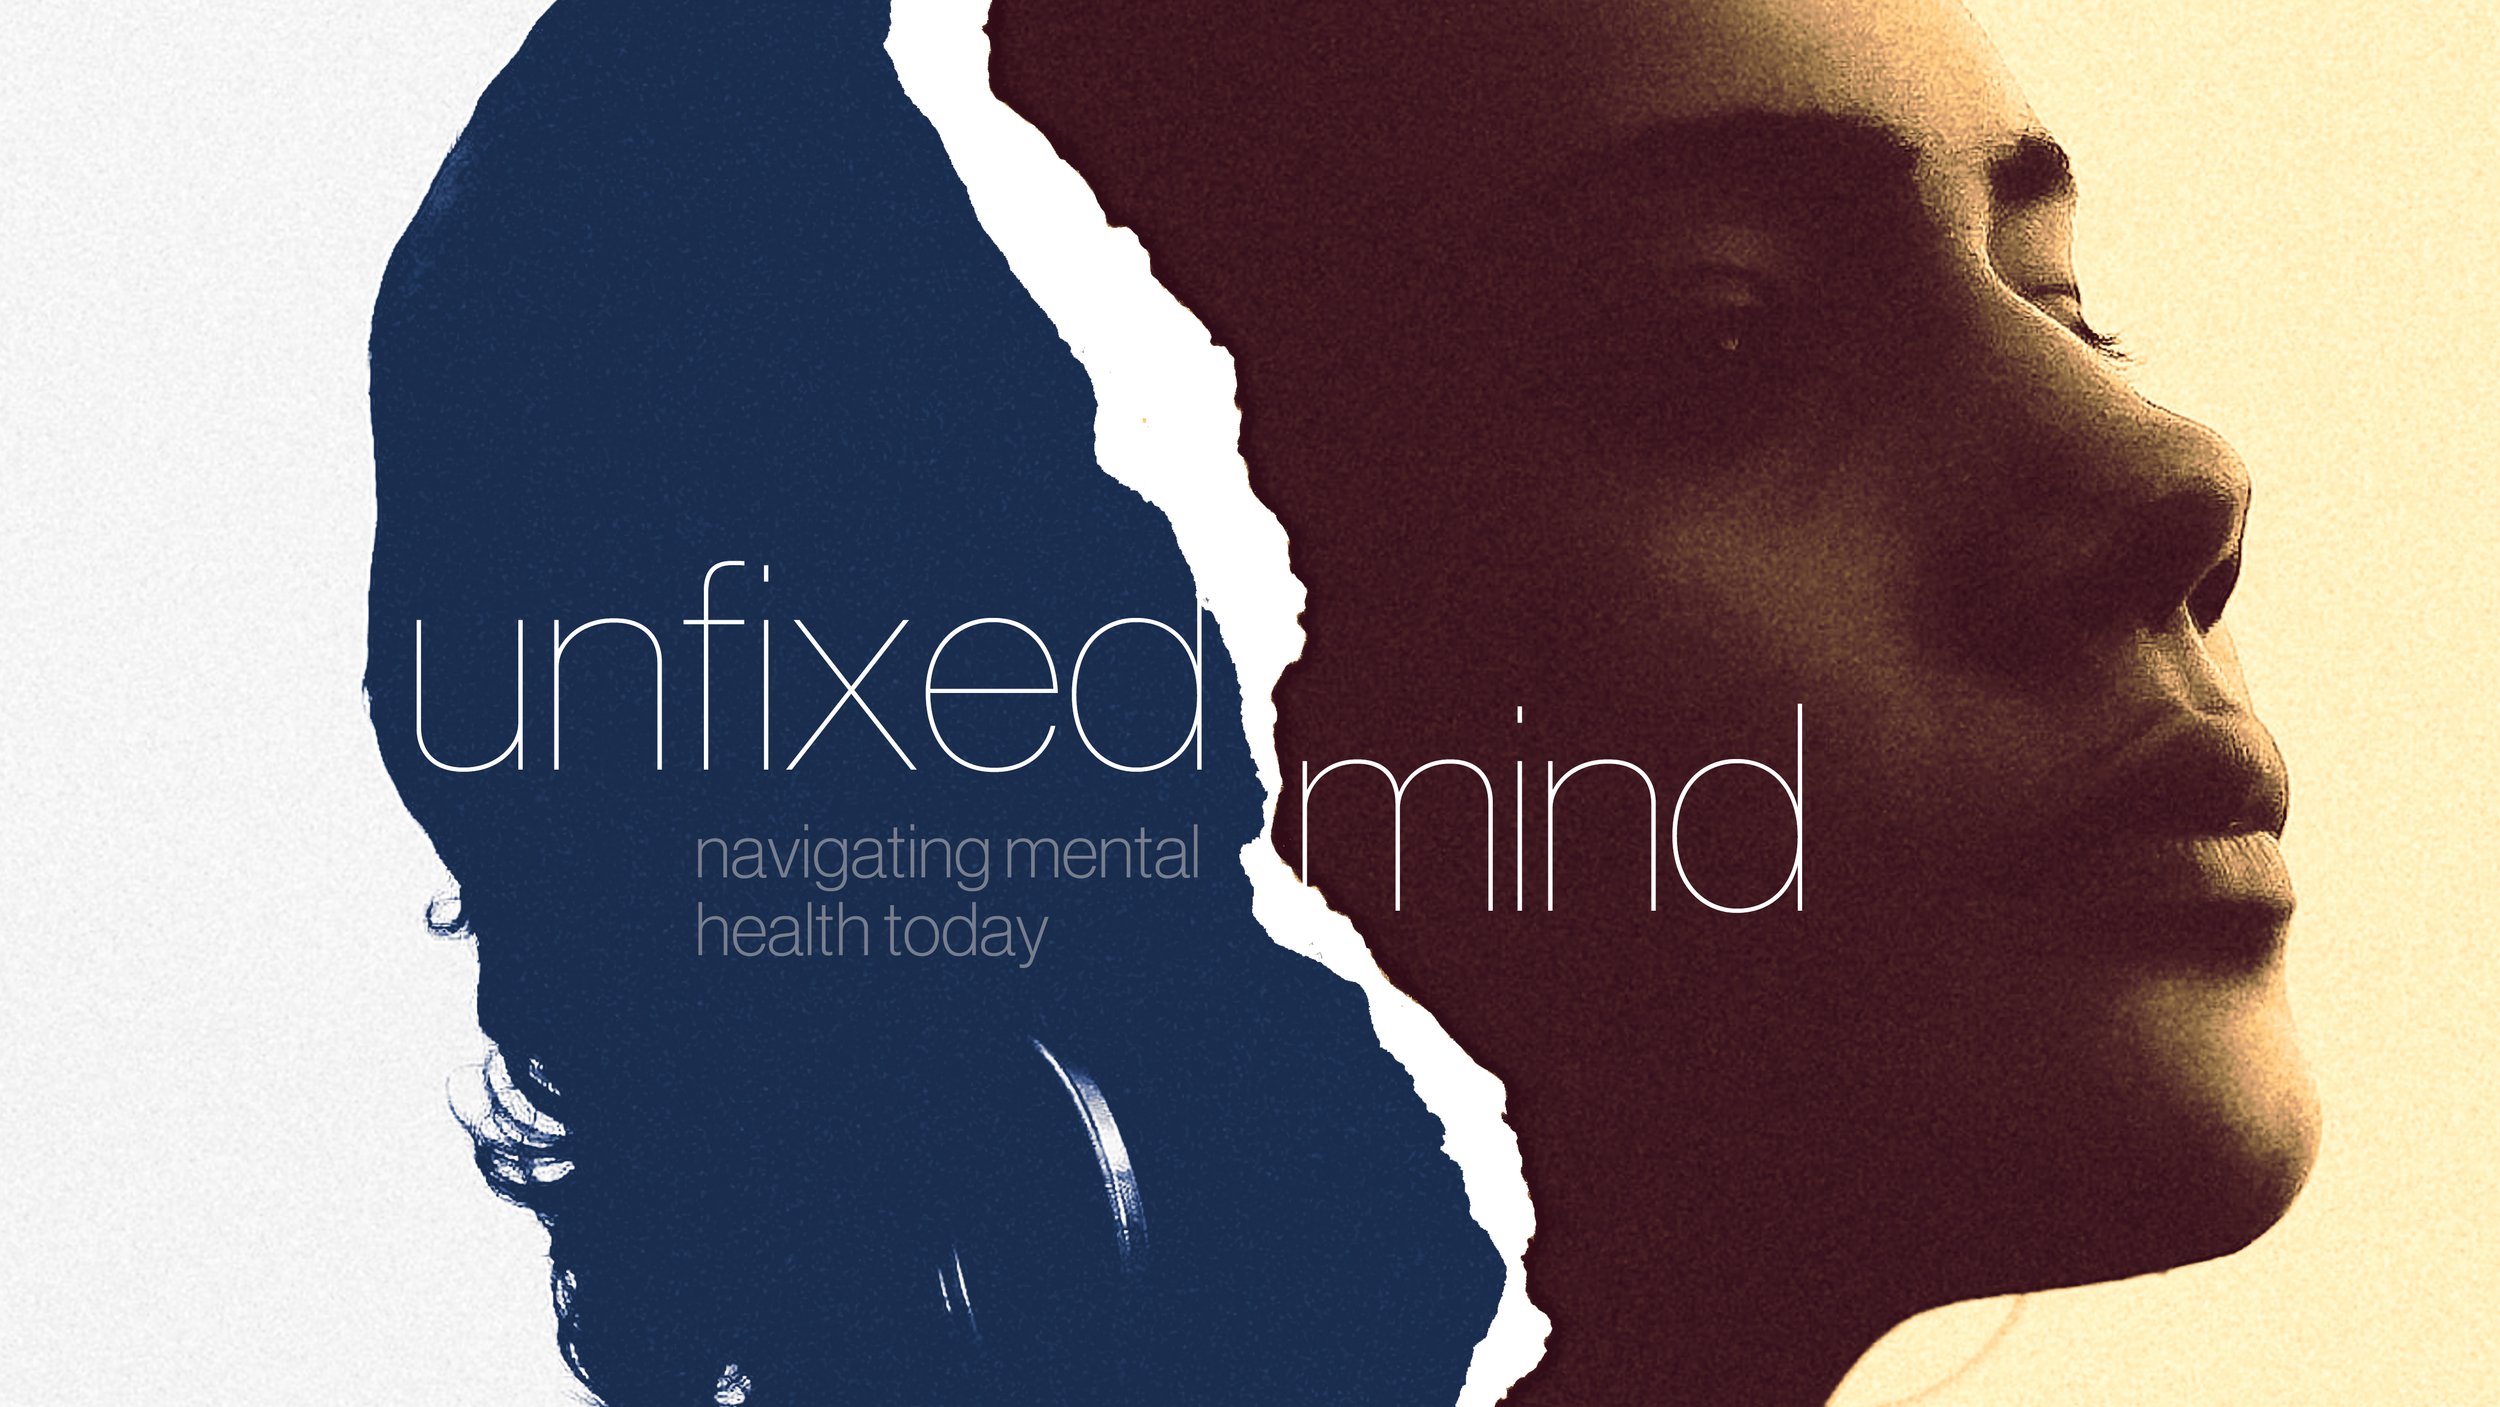 An image of a black person with text: Unfixed minds - navigating mental health today